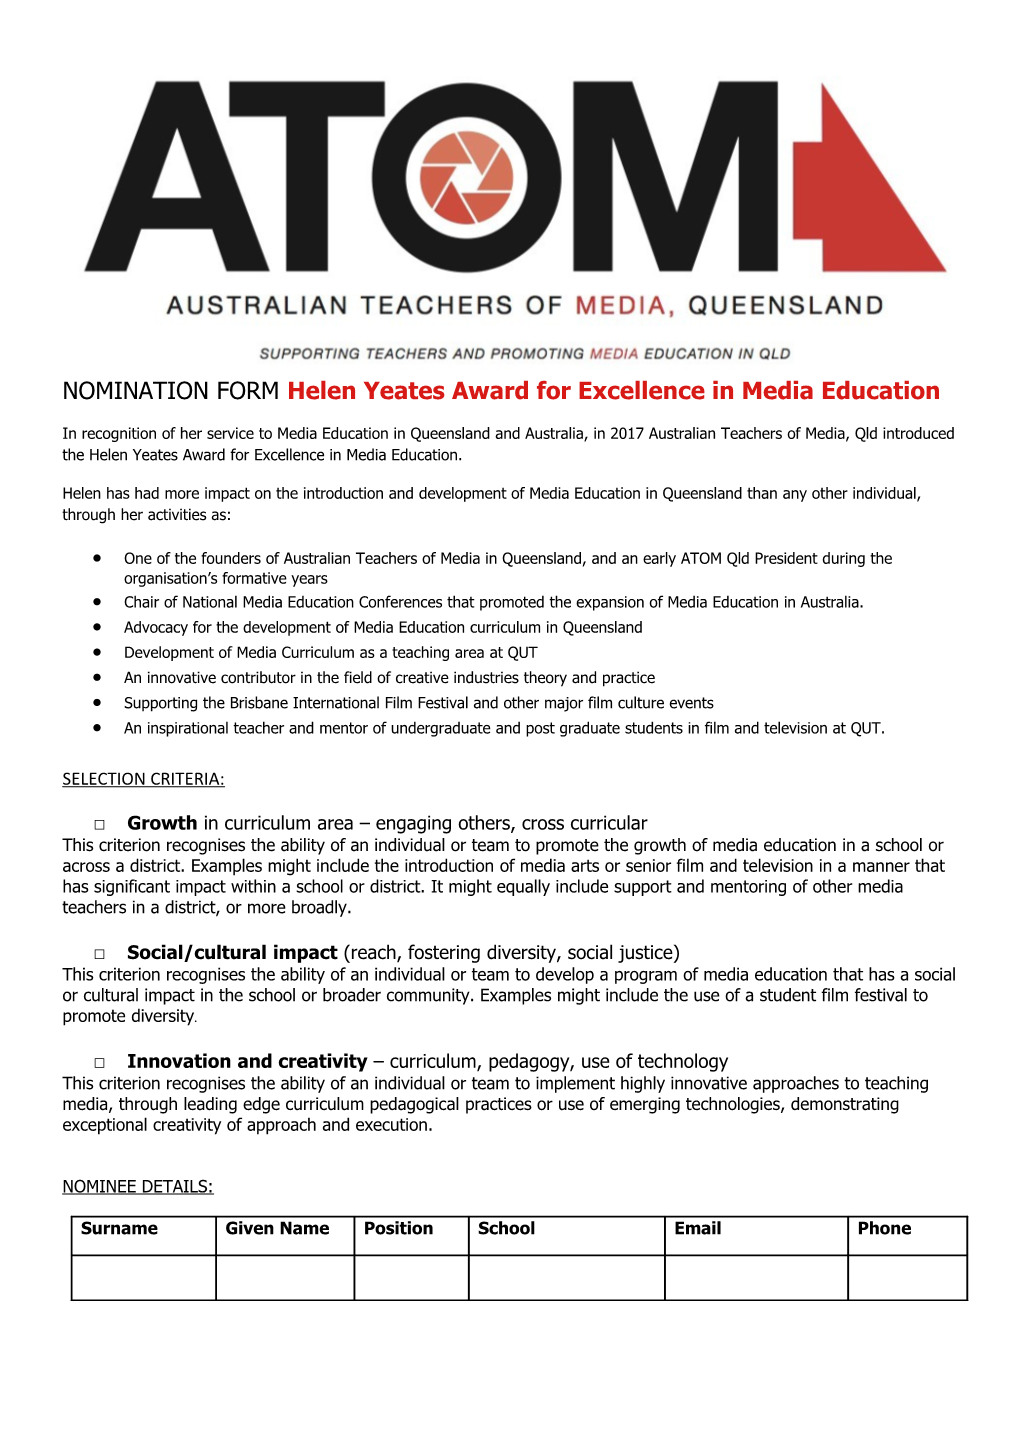 NOMINATION FORM Helen Yeates Award for Excellence in Media Education